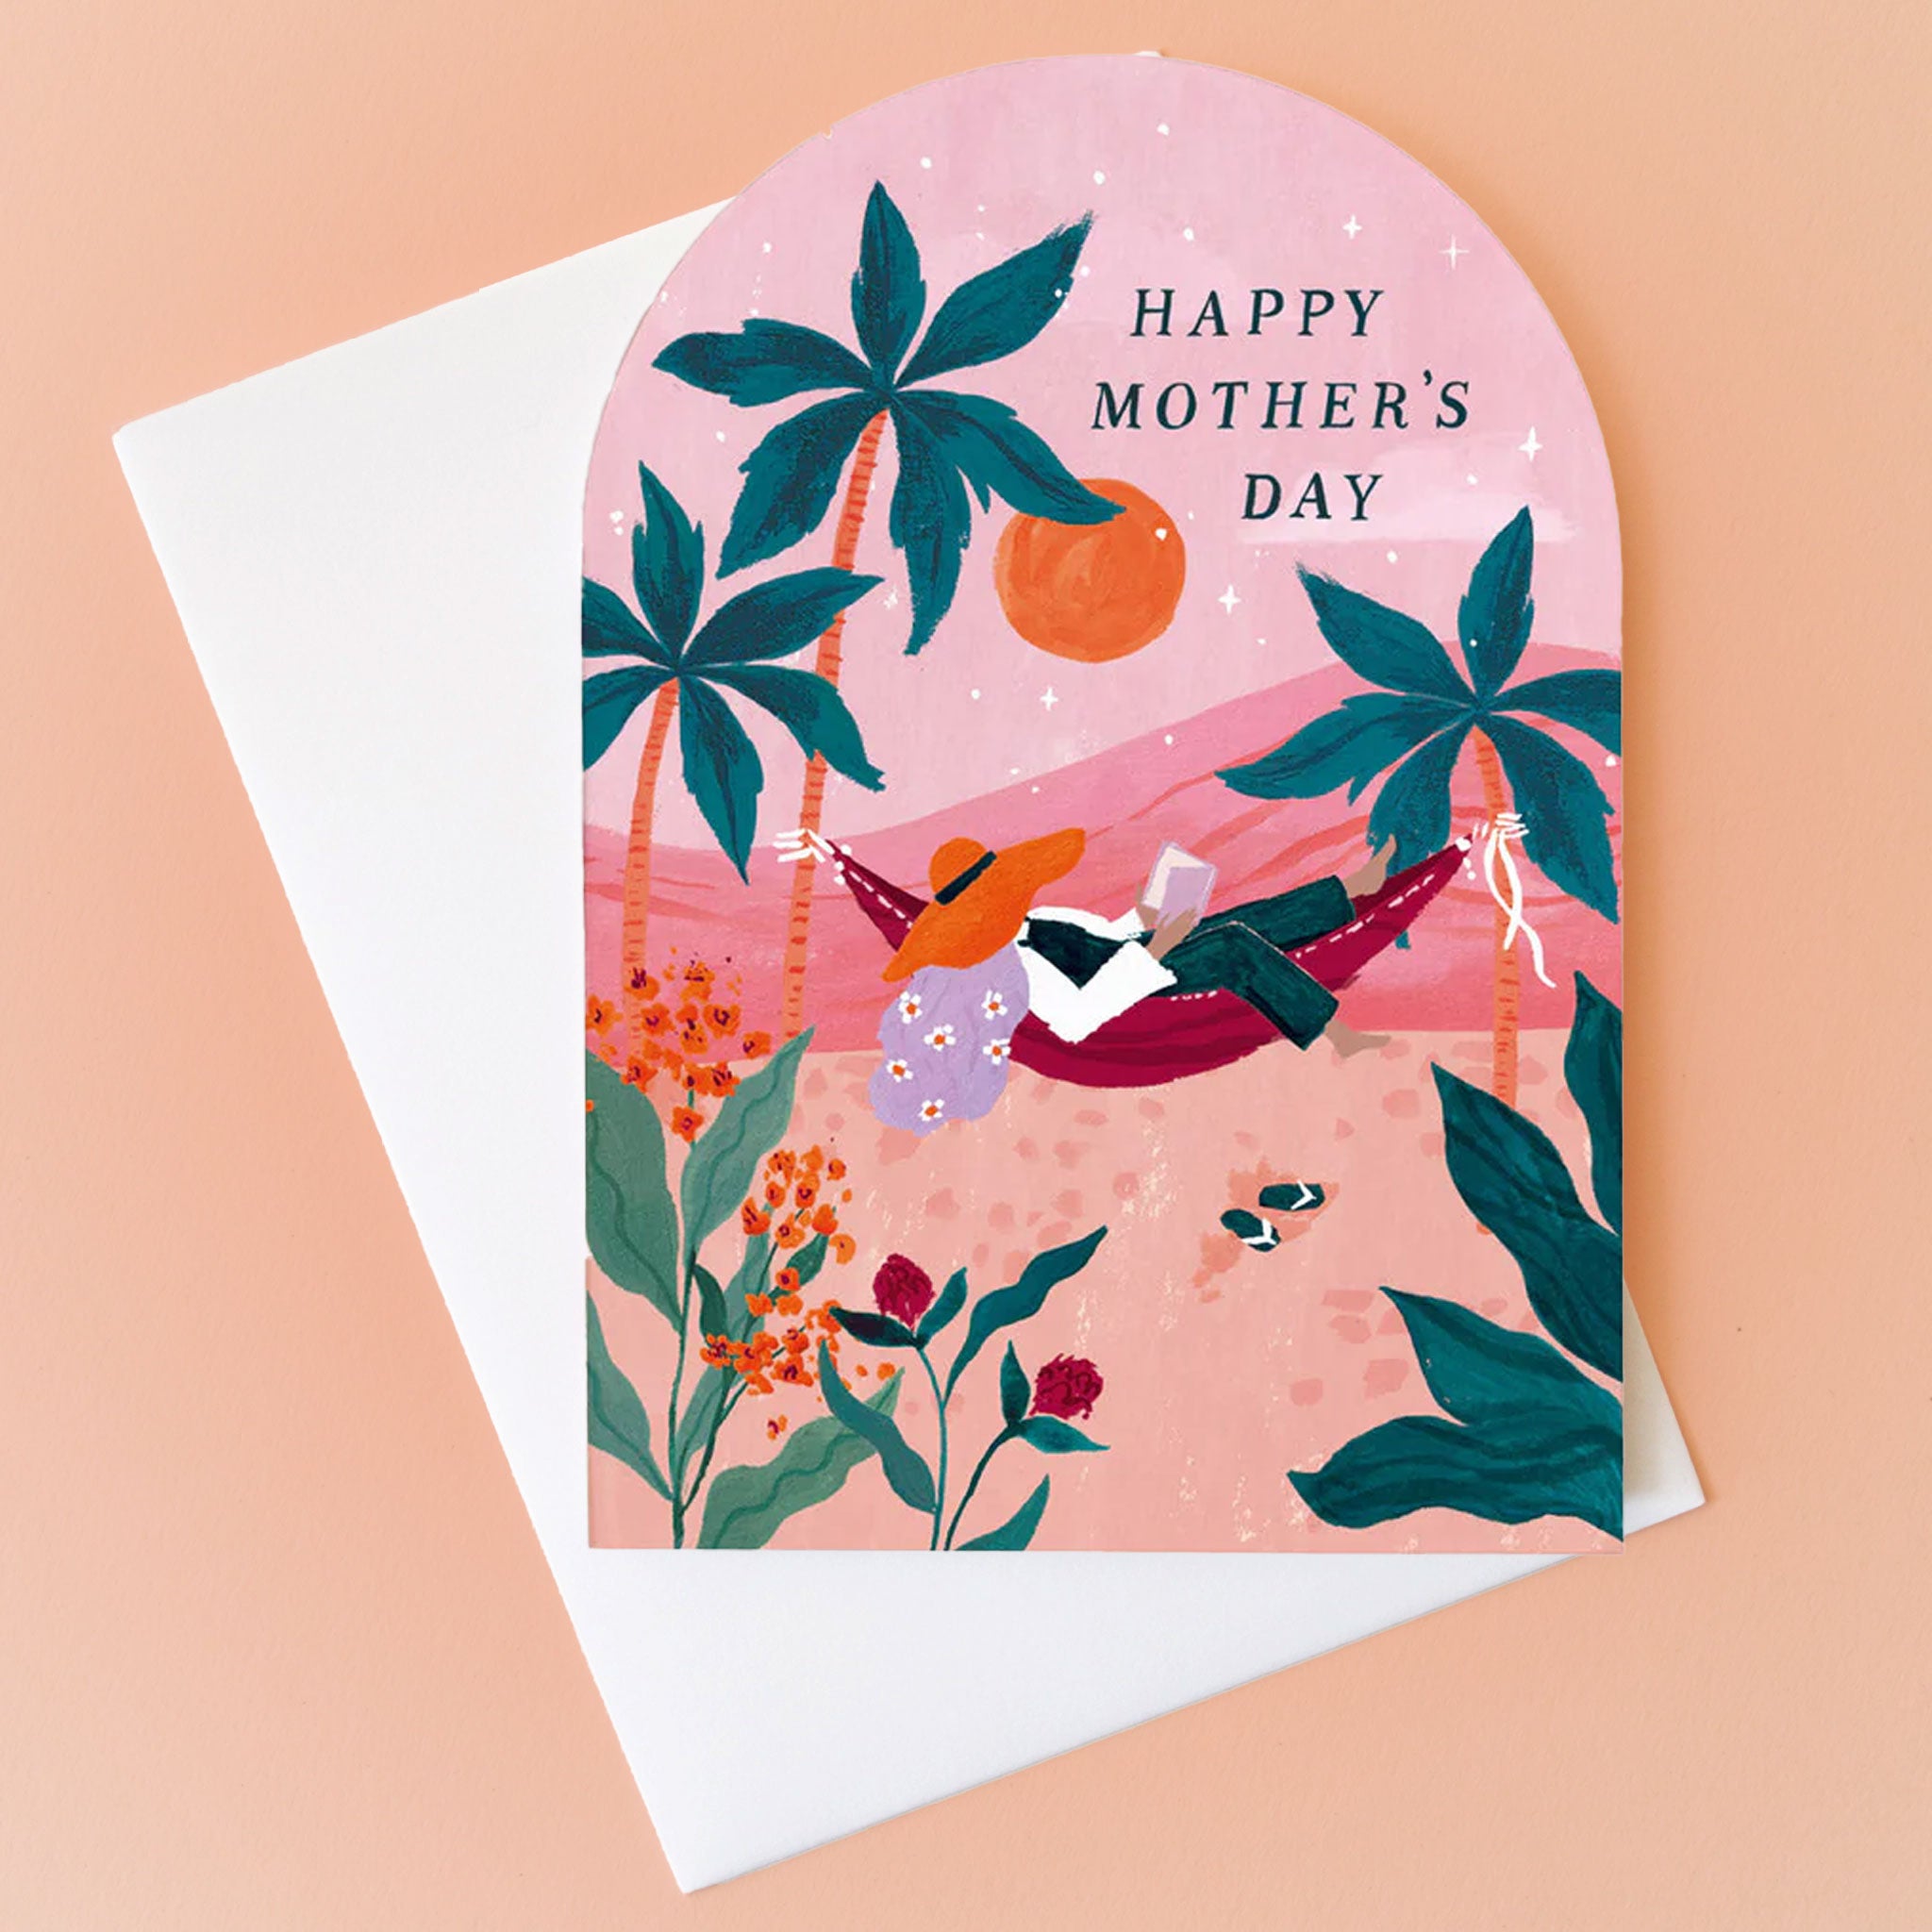 On a peachy background is an arched card with a palm tree illustration and text that reads, "Happy Mother's Day". 